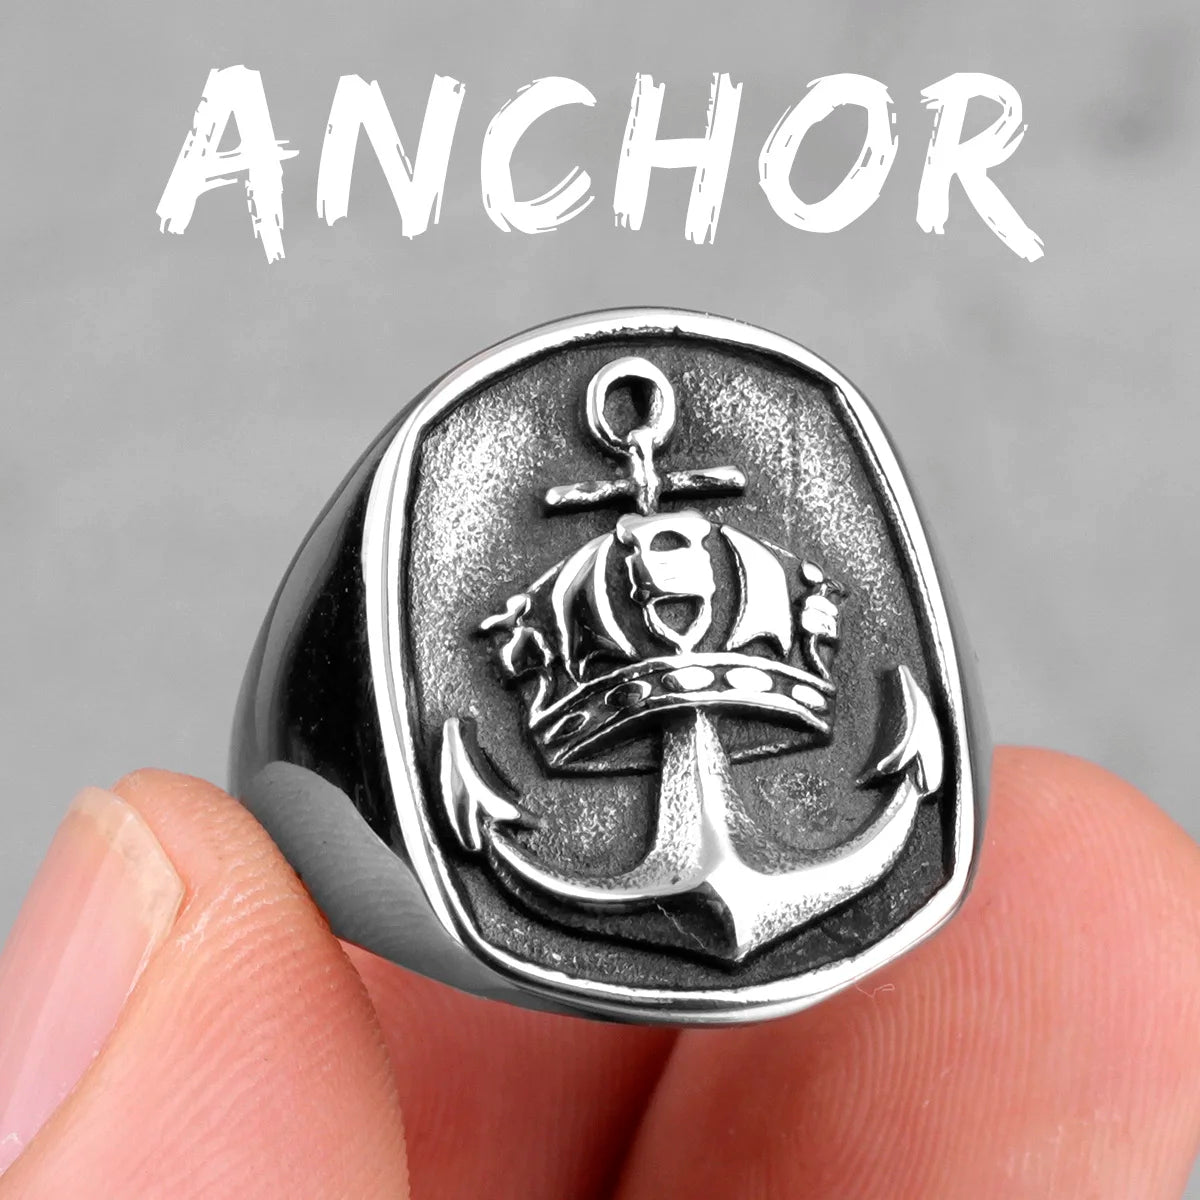 Anchor Lighthouse Ocean Sailor Ship Men Rings Stainless Steel Women Jewelry Vintage Punk Rock Fashion Accessories Gift R472-Anchor